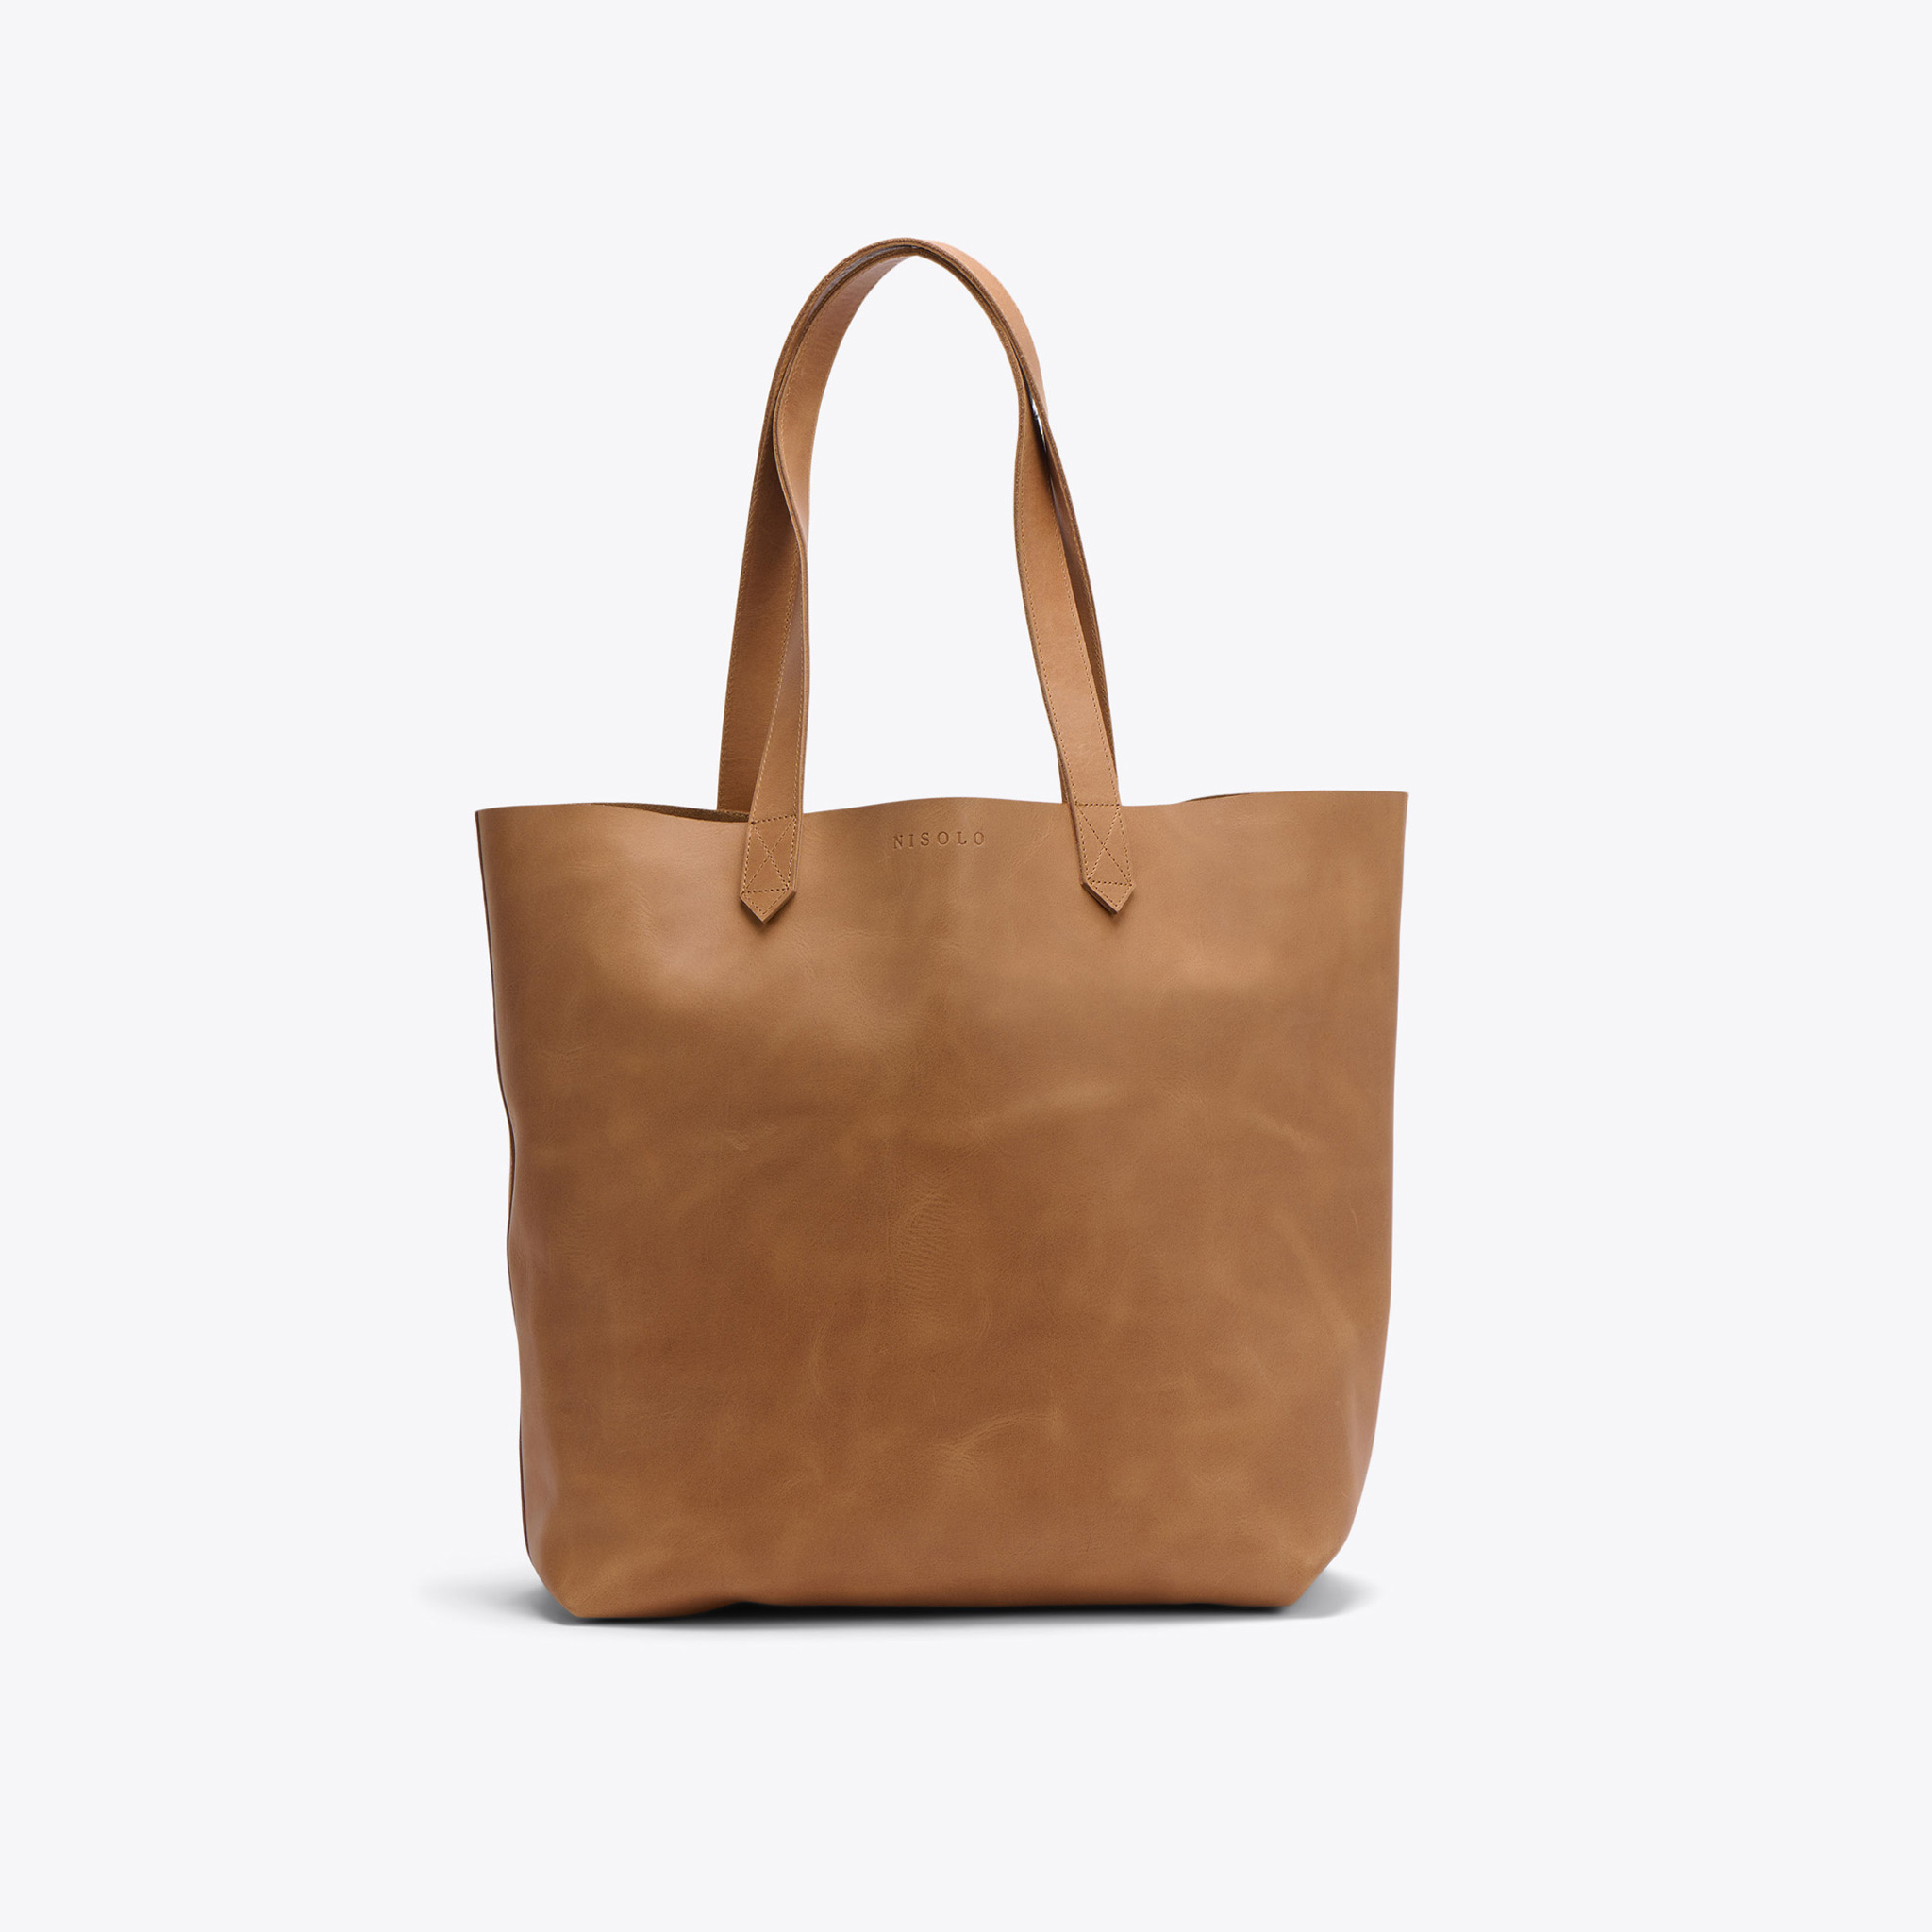 Nisolo Lori Tote Almond - Every Nisolo product is built on the foundation of comfort, function, and design. 